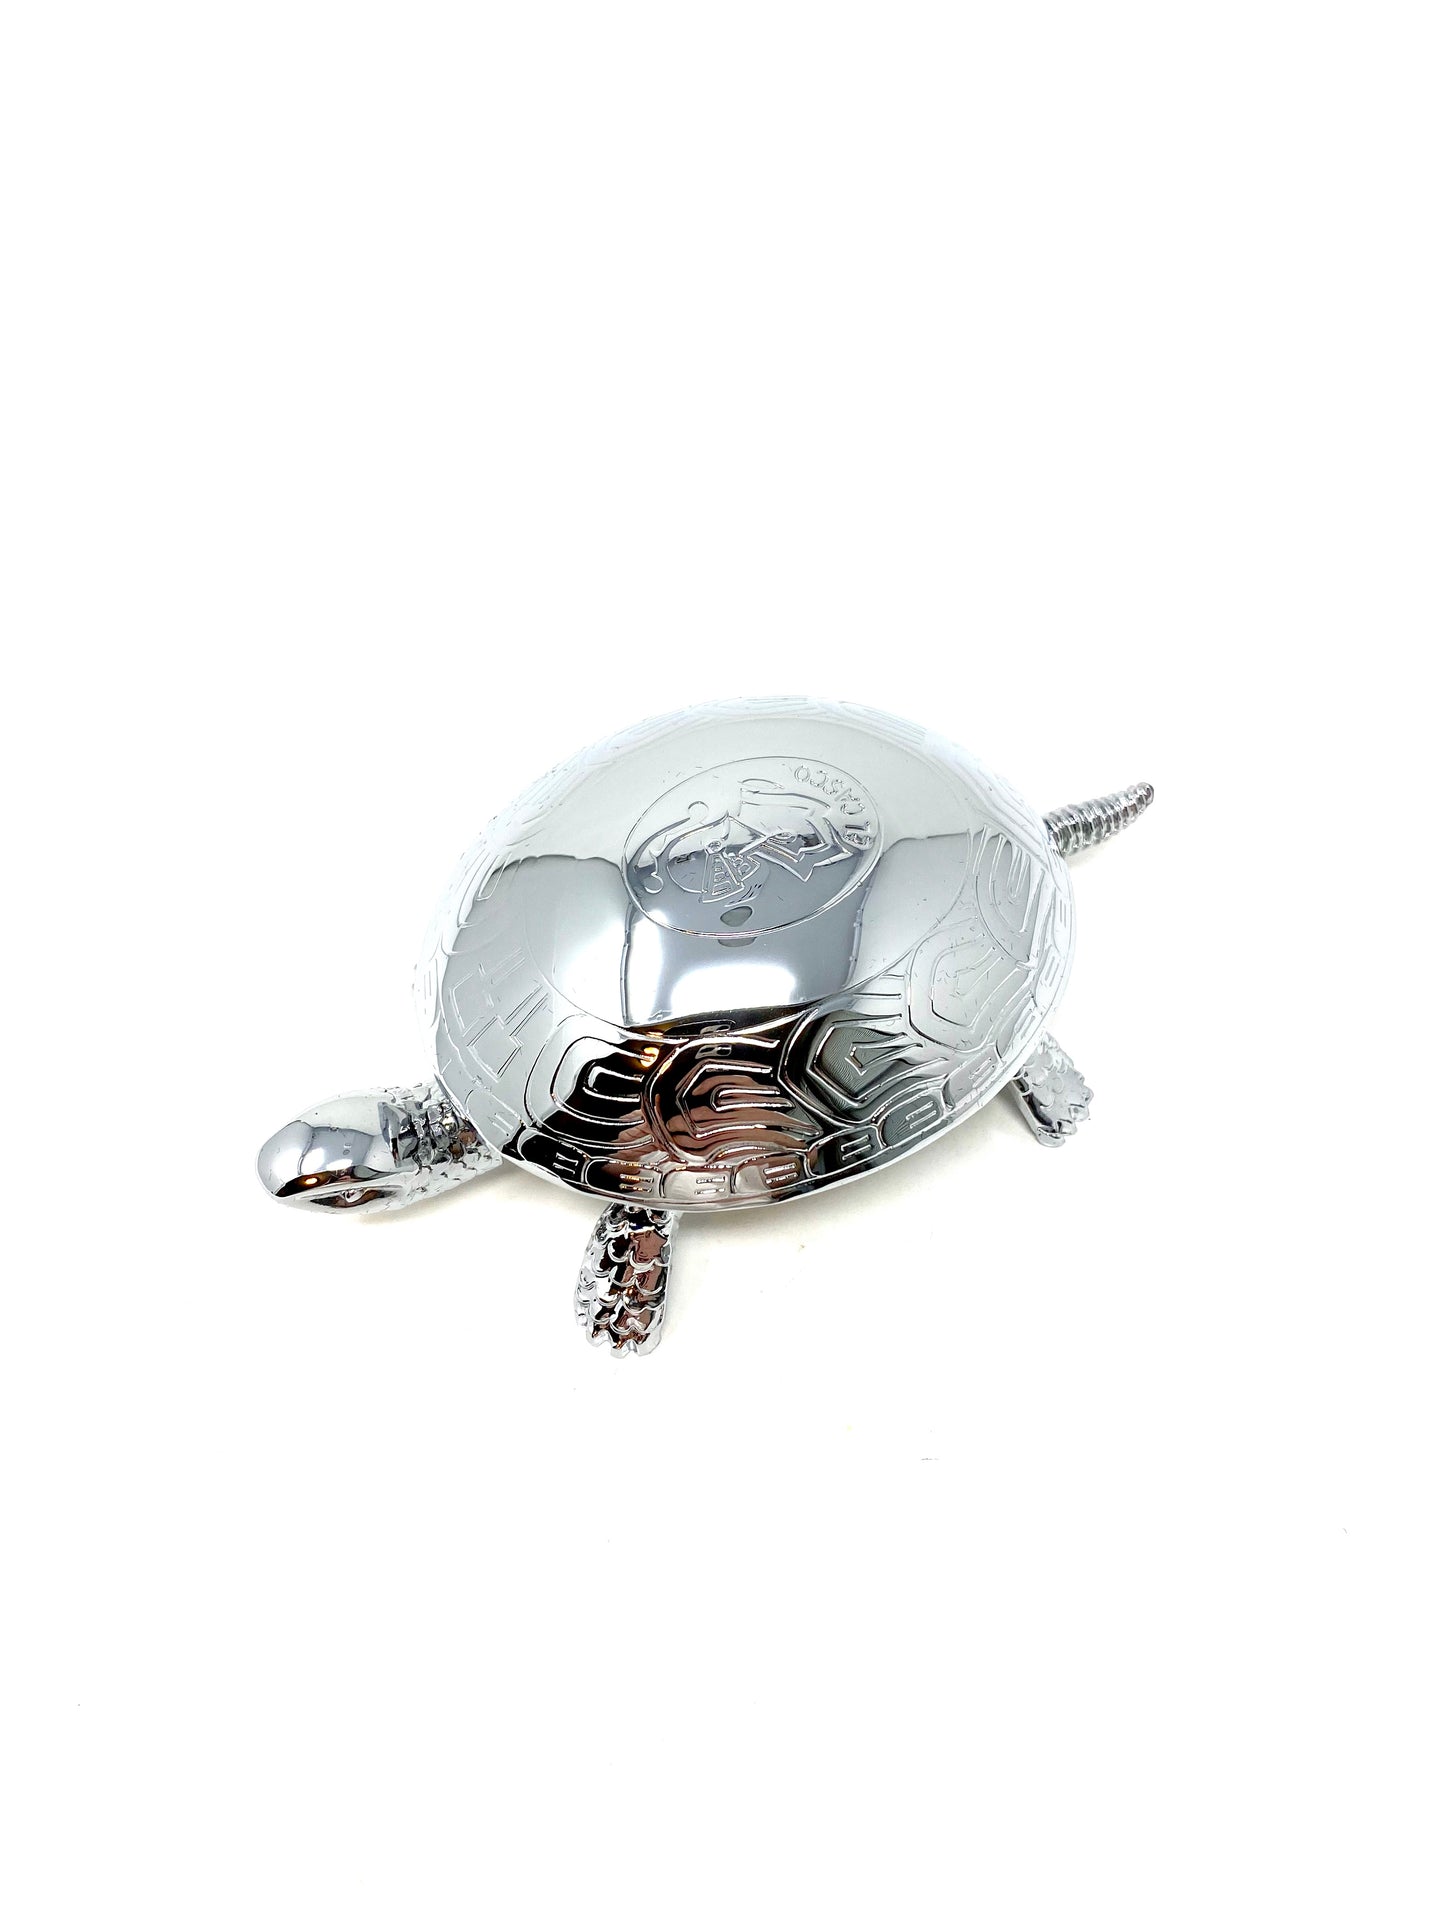 Chrome Plated Turtle Paperweight and Bell